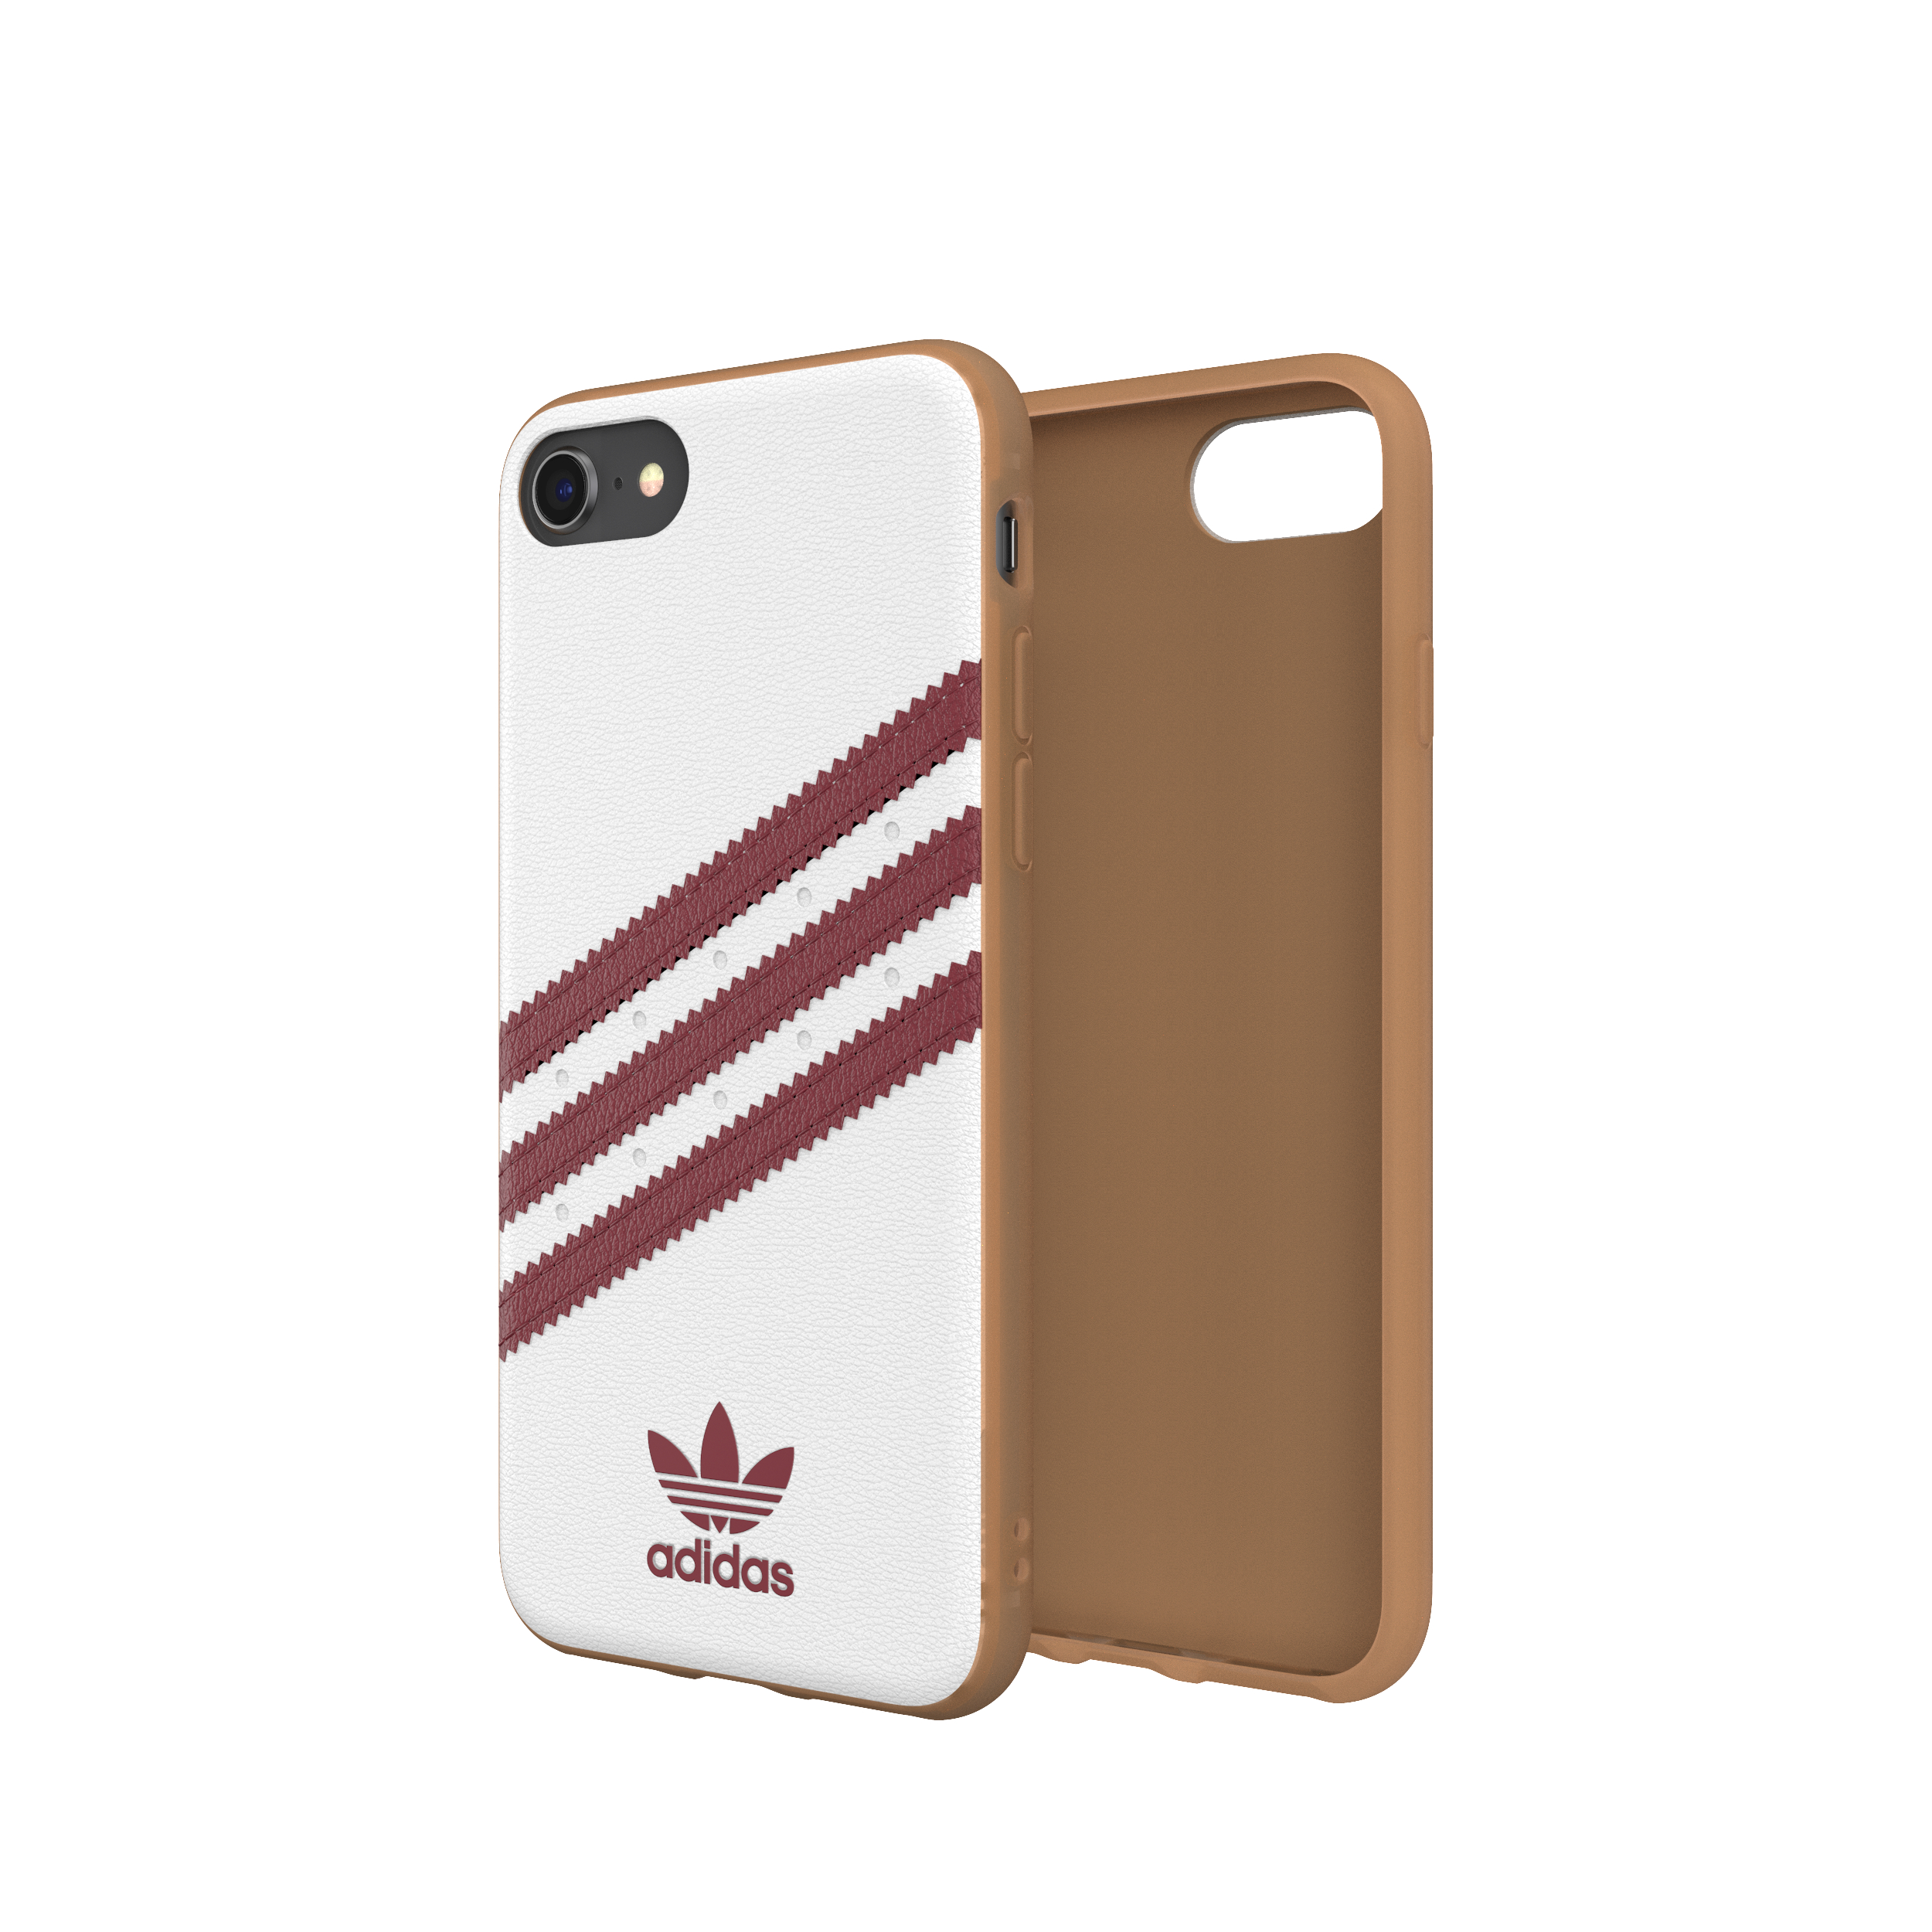 iPhone ORIGINALS Apple, (2020), Case, Weiß/Rot iPhone OR 8, Moulded SE 7, iPhone iPhone Backcover, ADIDAS 6,